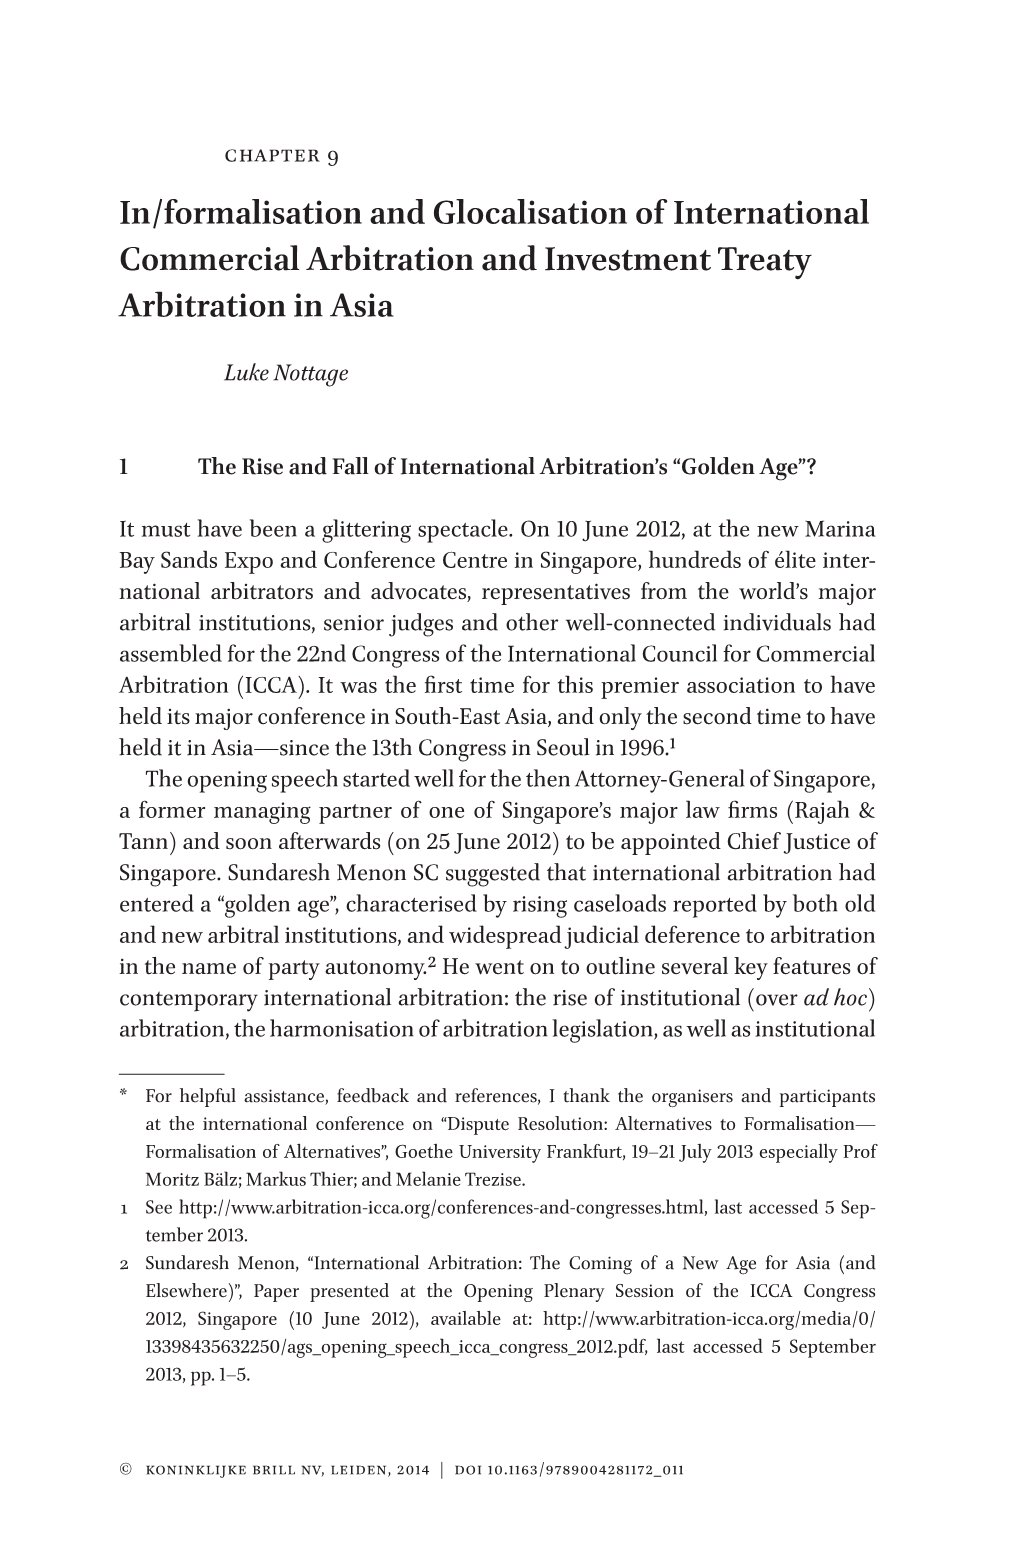 In/Formalisation and Glocalisation of International Commercial Arbitration and Investment Treaty Arbitration in Asia